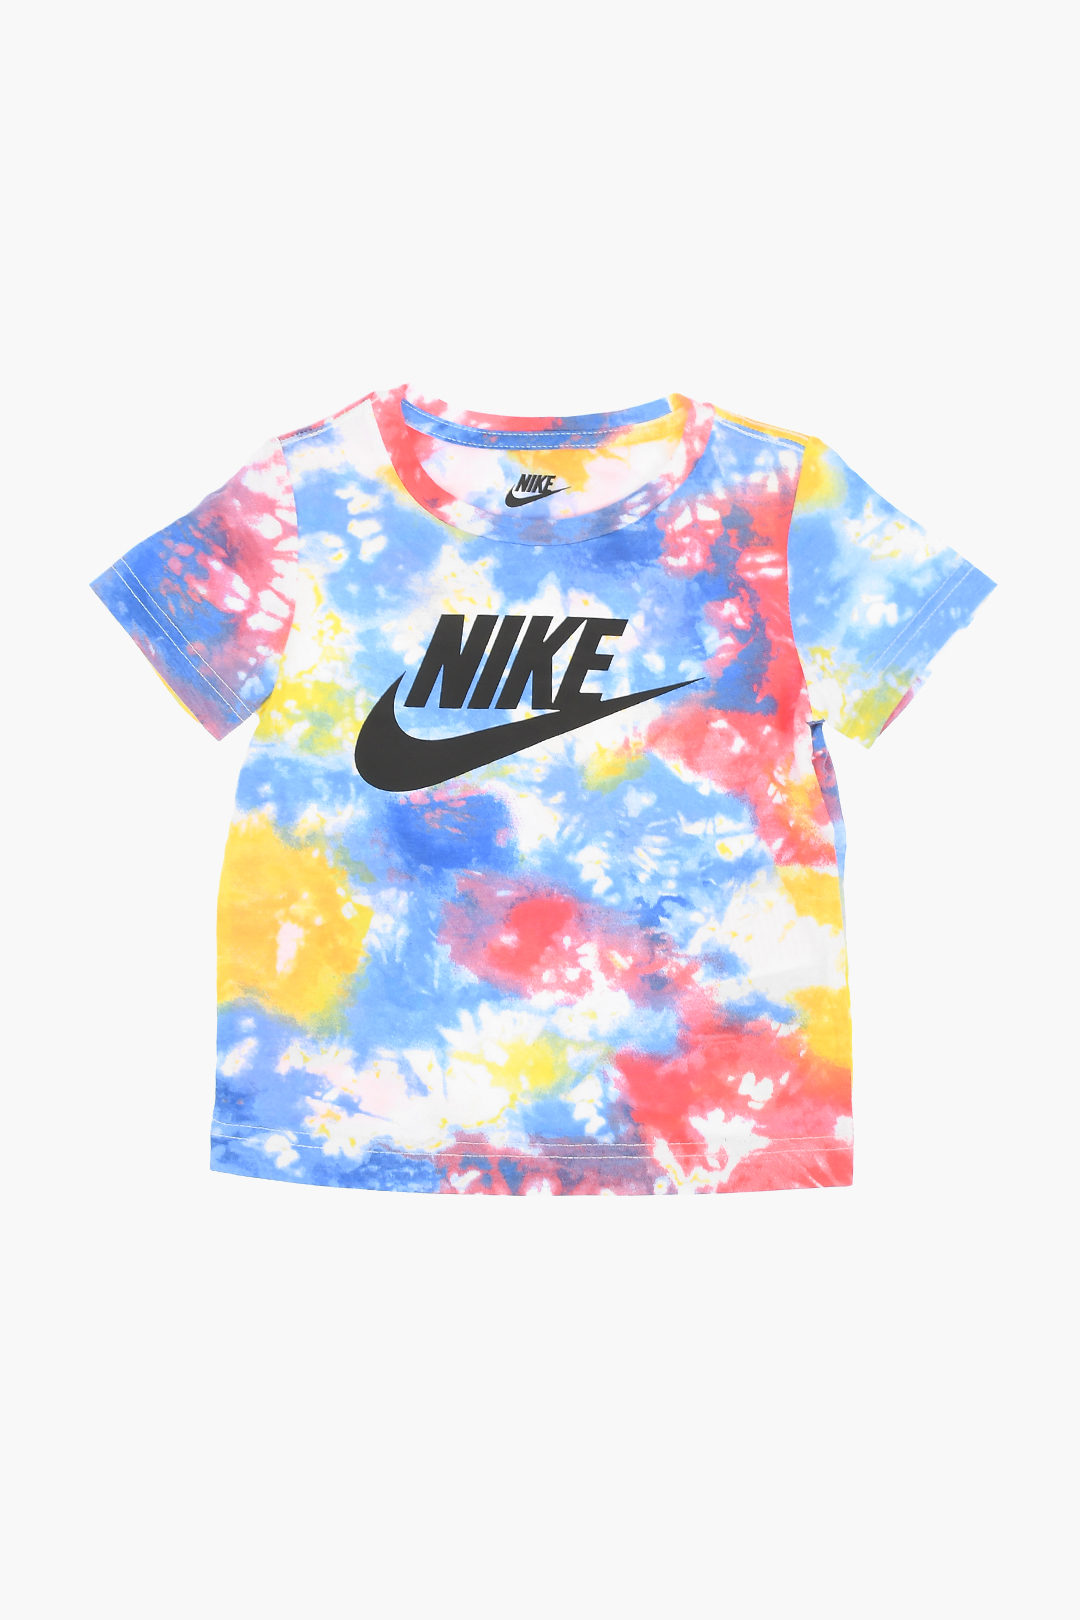 Nike KIDS Tie Dye Effect and Shorts boys - Outlet